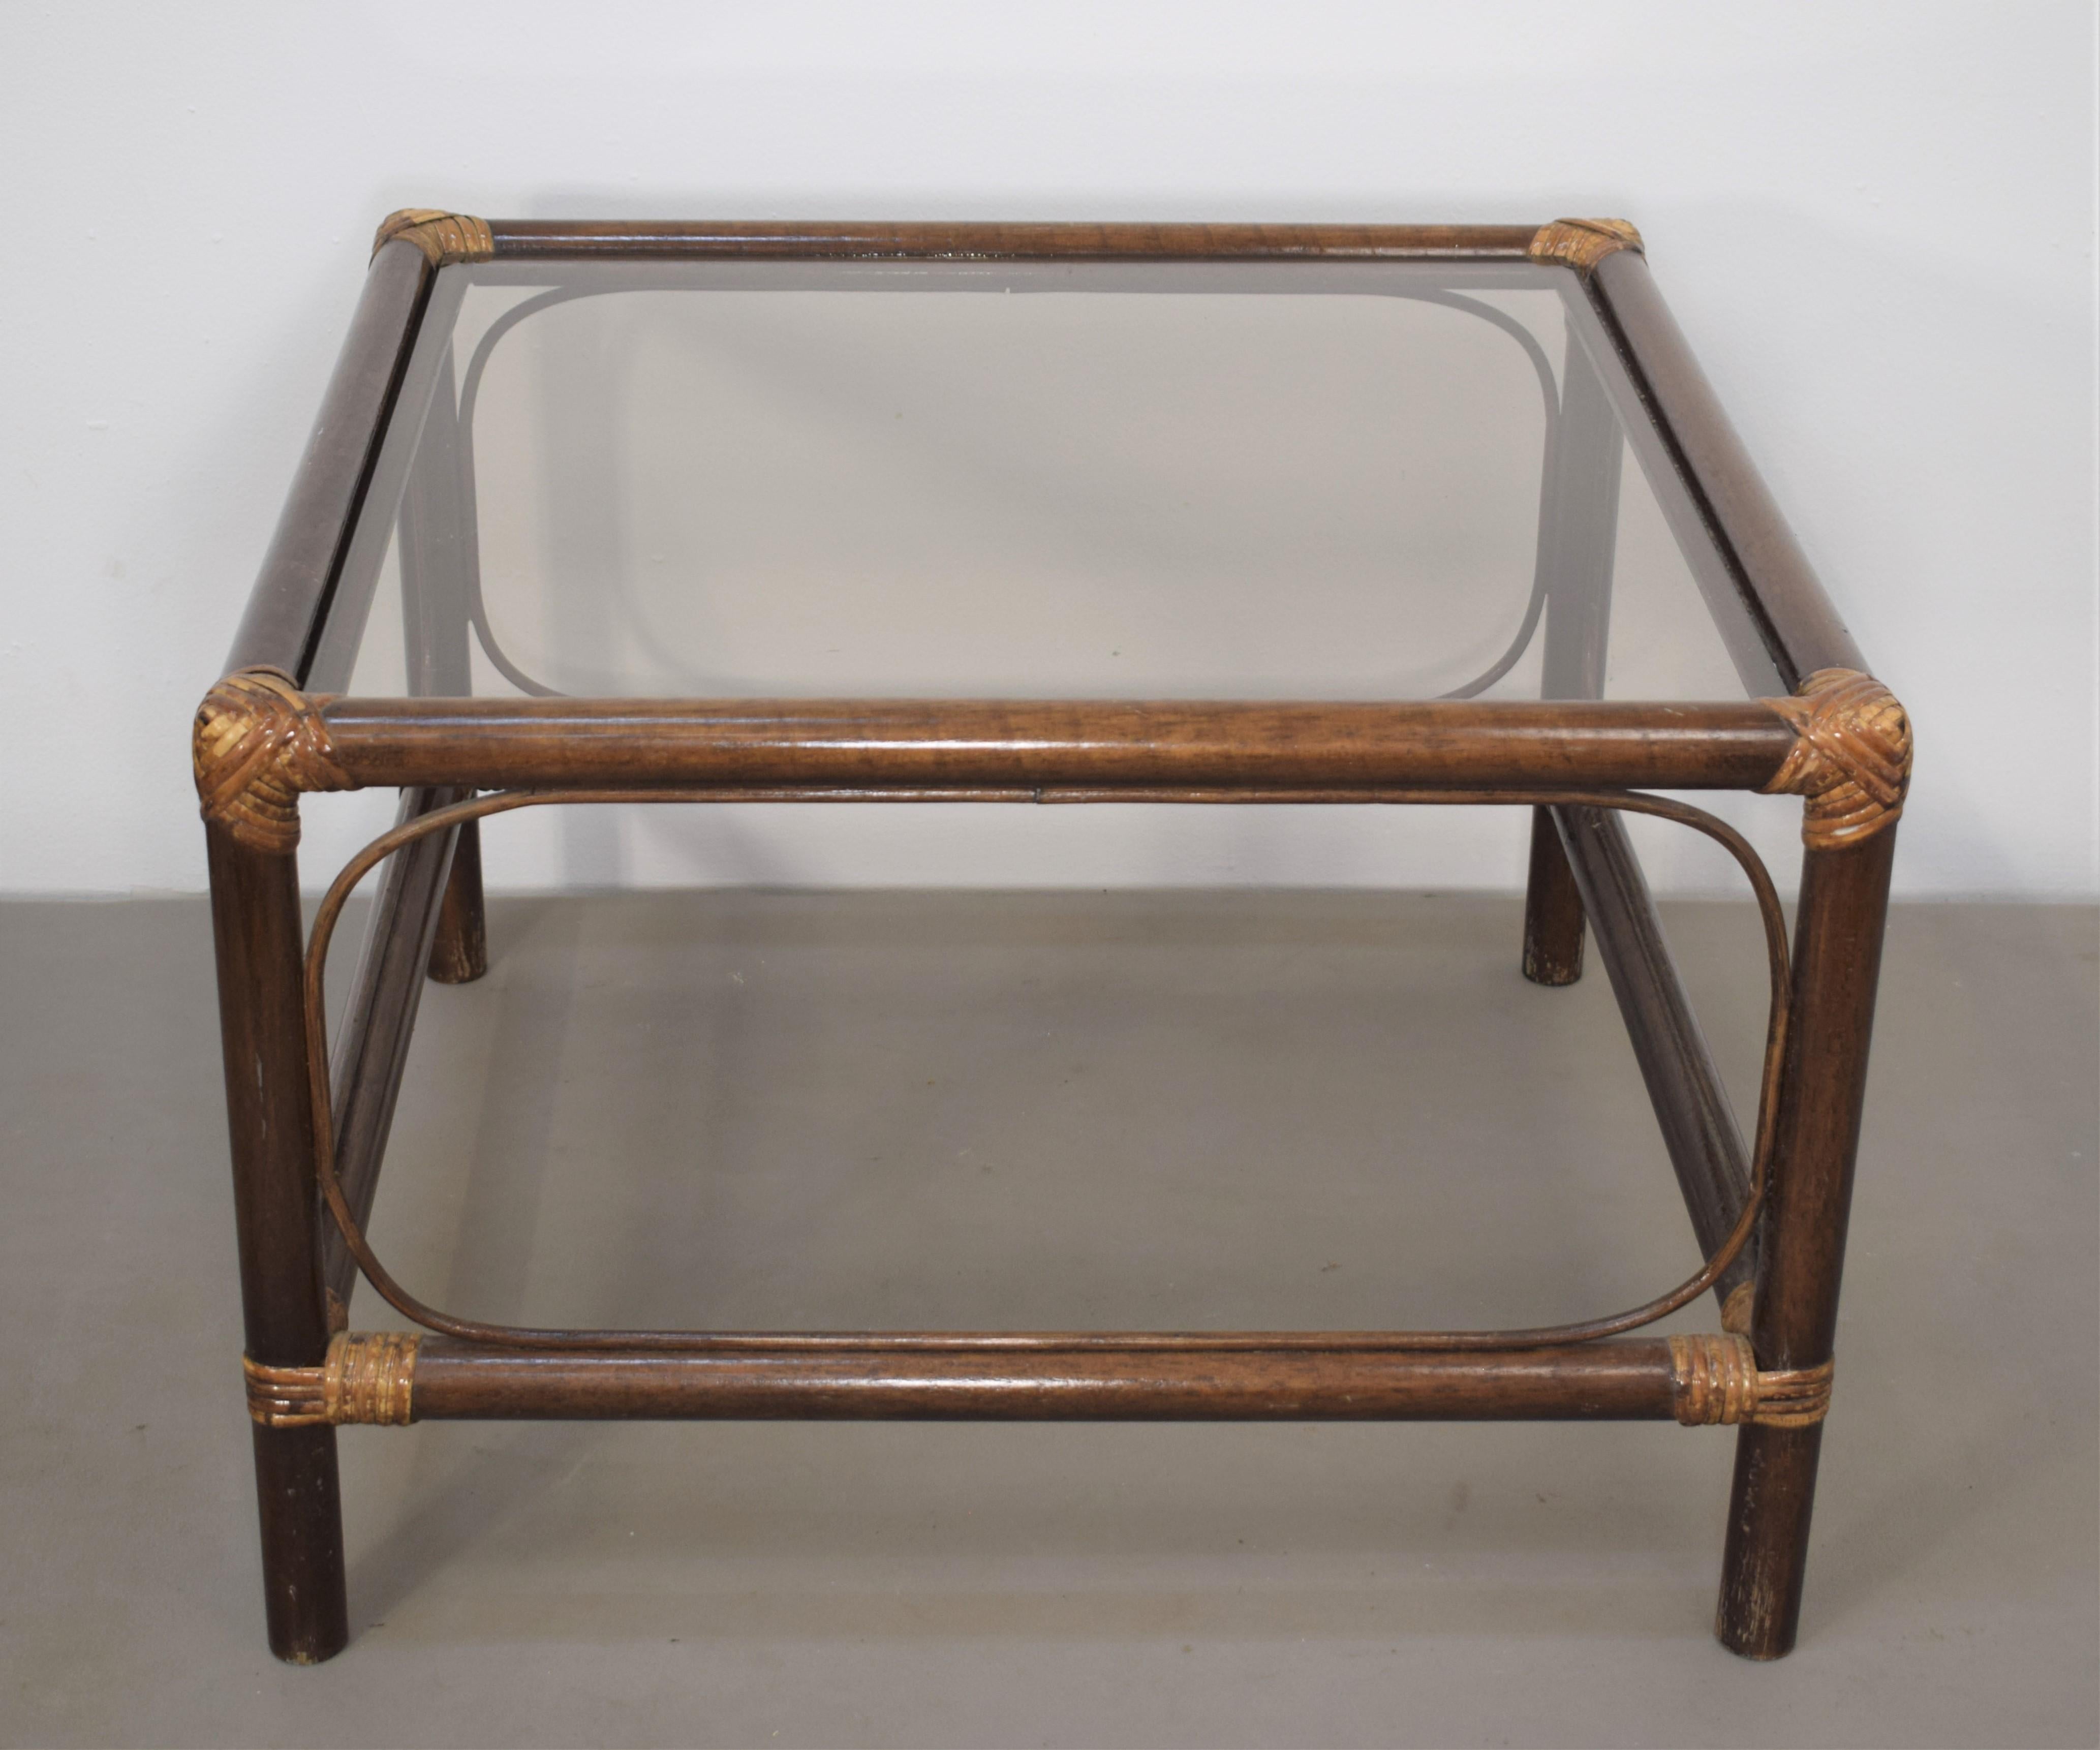 Mid-20th Century Italian Bamboo and Smoked Glass Coffee Table, 1960s For Sale